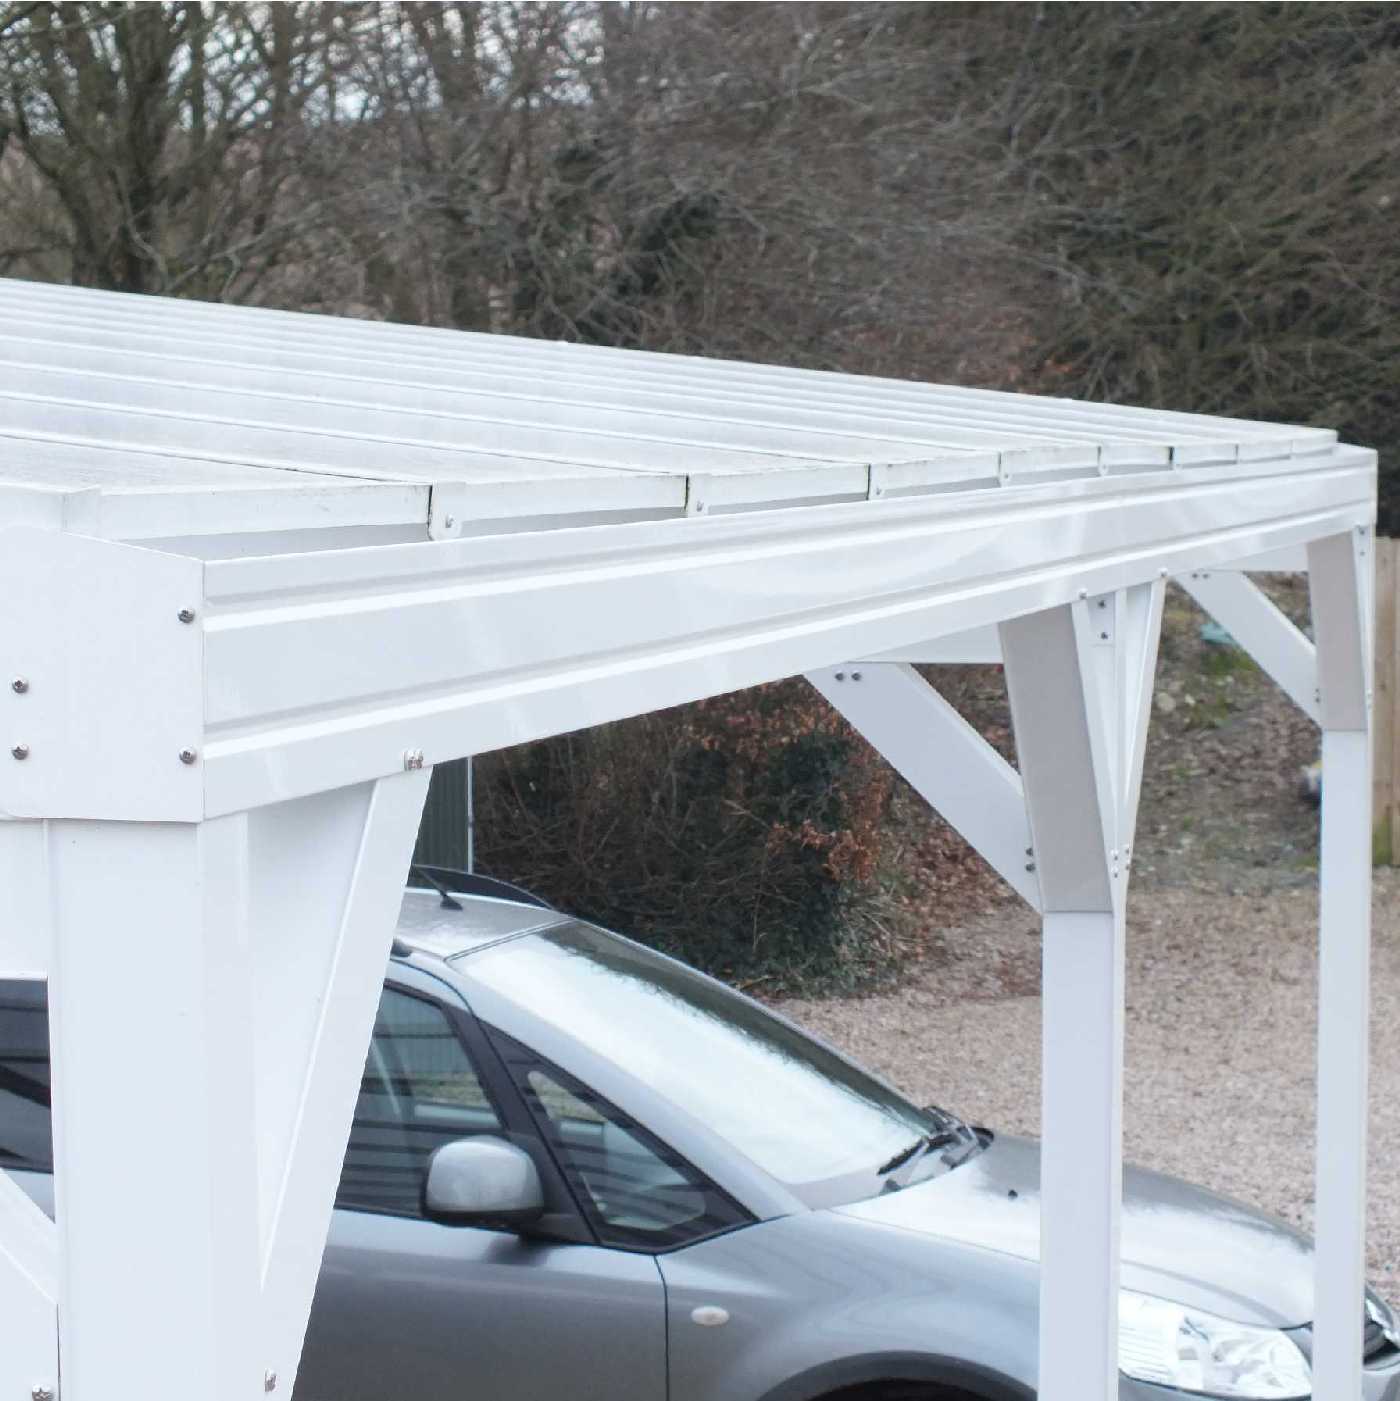 Omega Smart Free-Standing, White MonoPitch Roof Canopy with 6mm Glass Clear Plate Polycarbonate Glazing - 2.8m (W) x 2.5m (P), (4) Supporting Posts from Omega Build